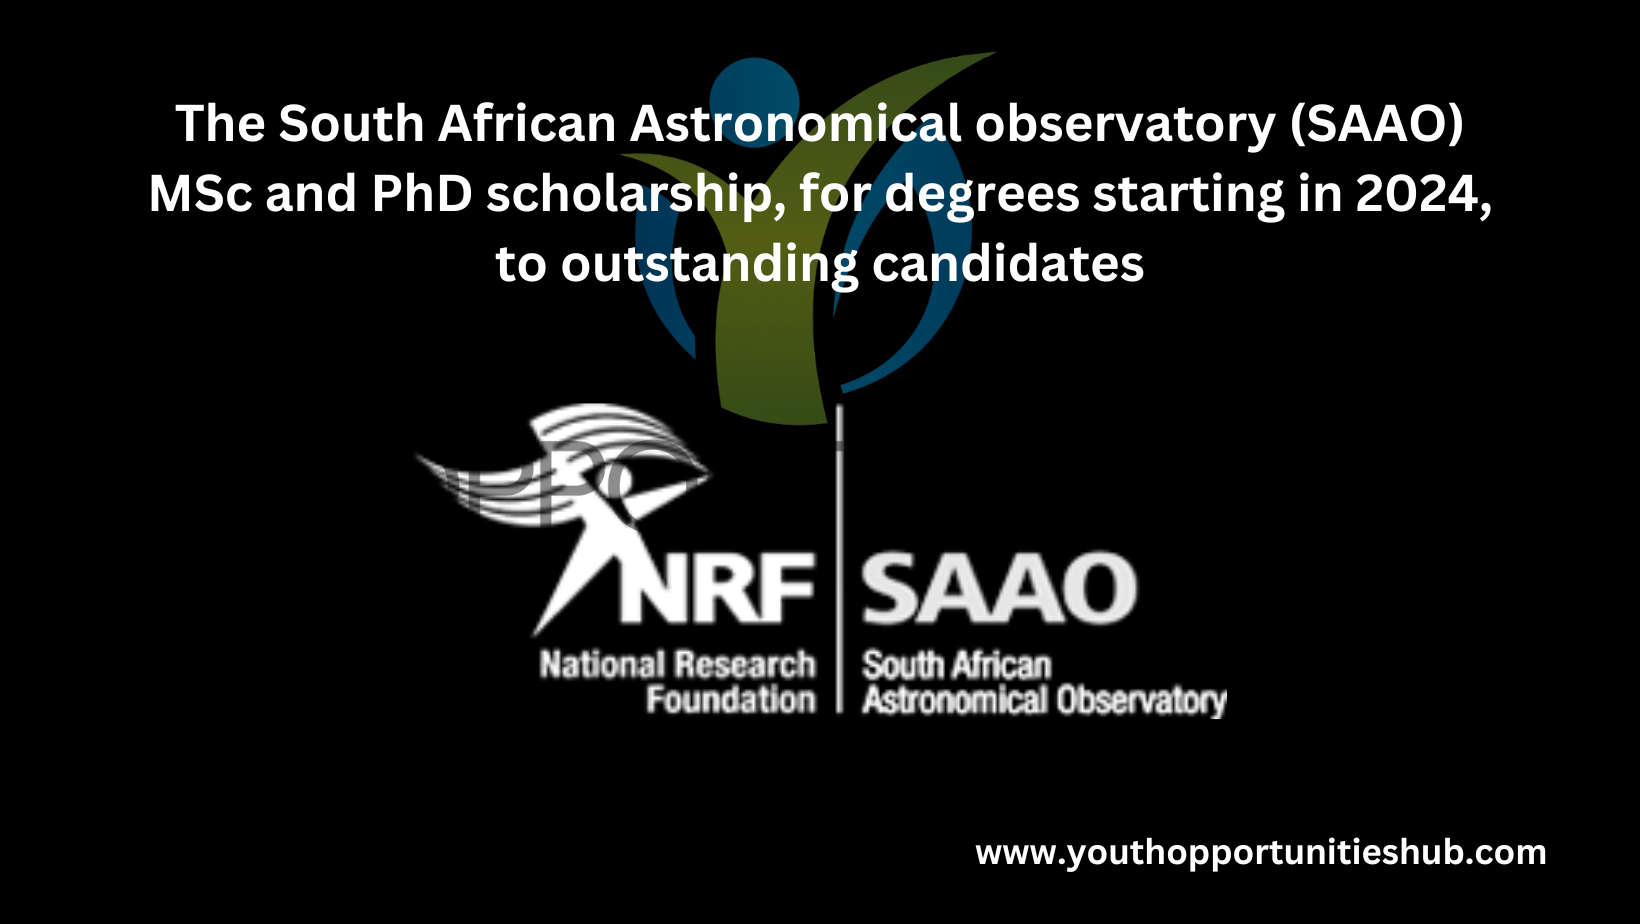 The South African Astronomical observatory (SAAO) MSc and PhD